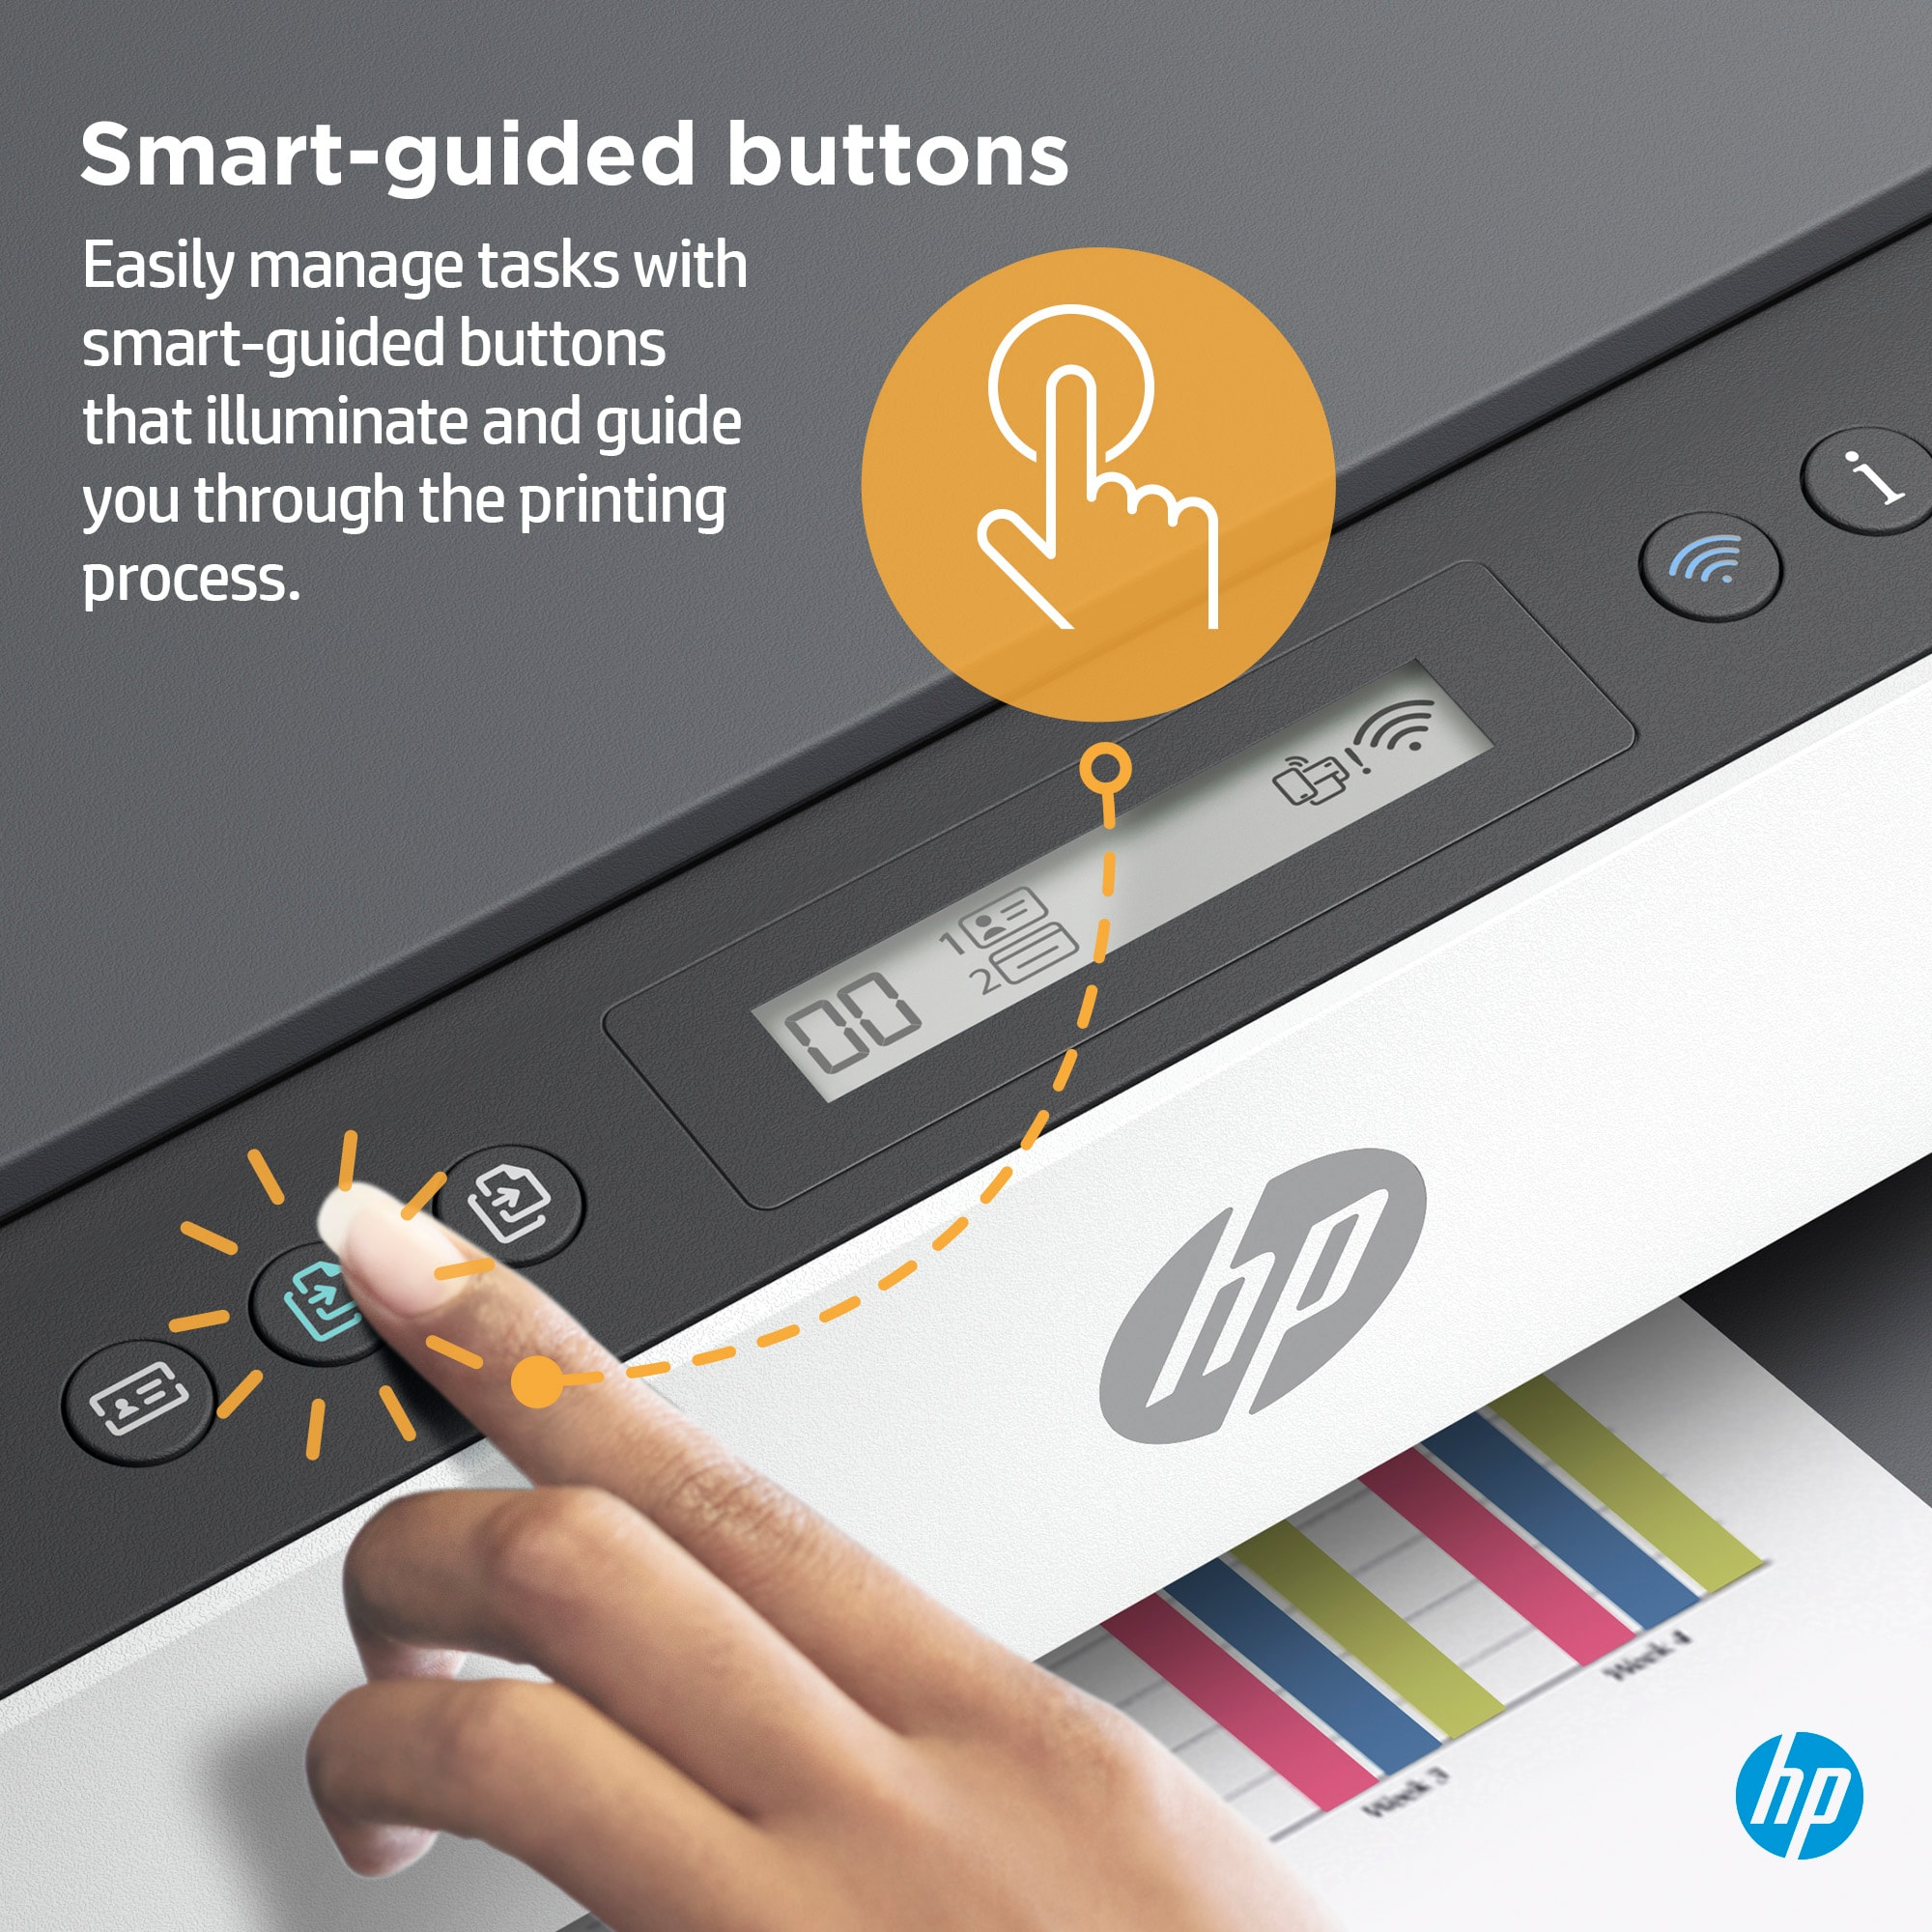 HP Smart Tank 7005 All-in-One